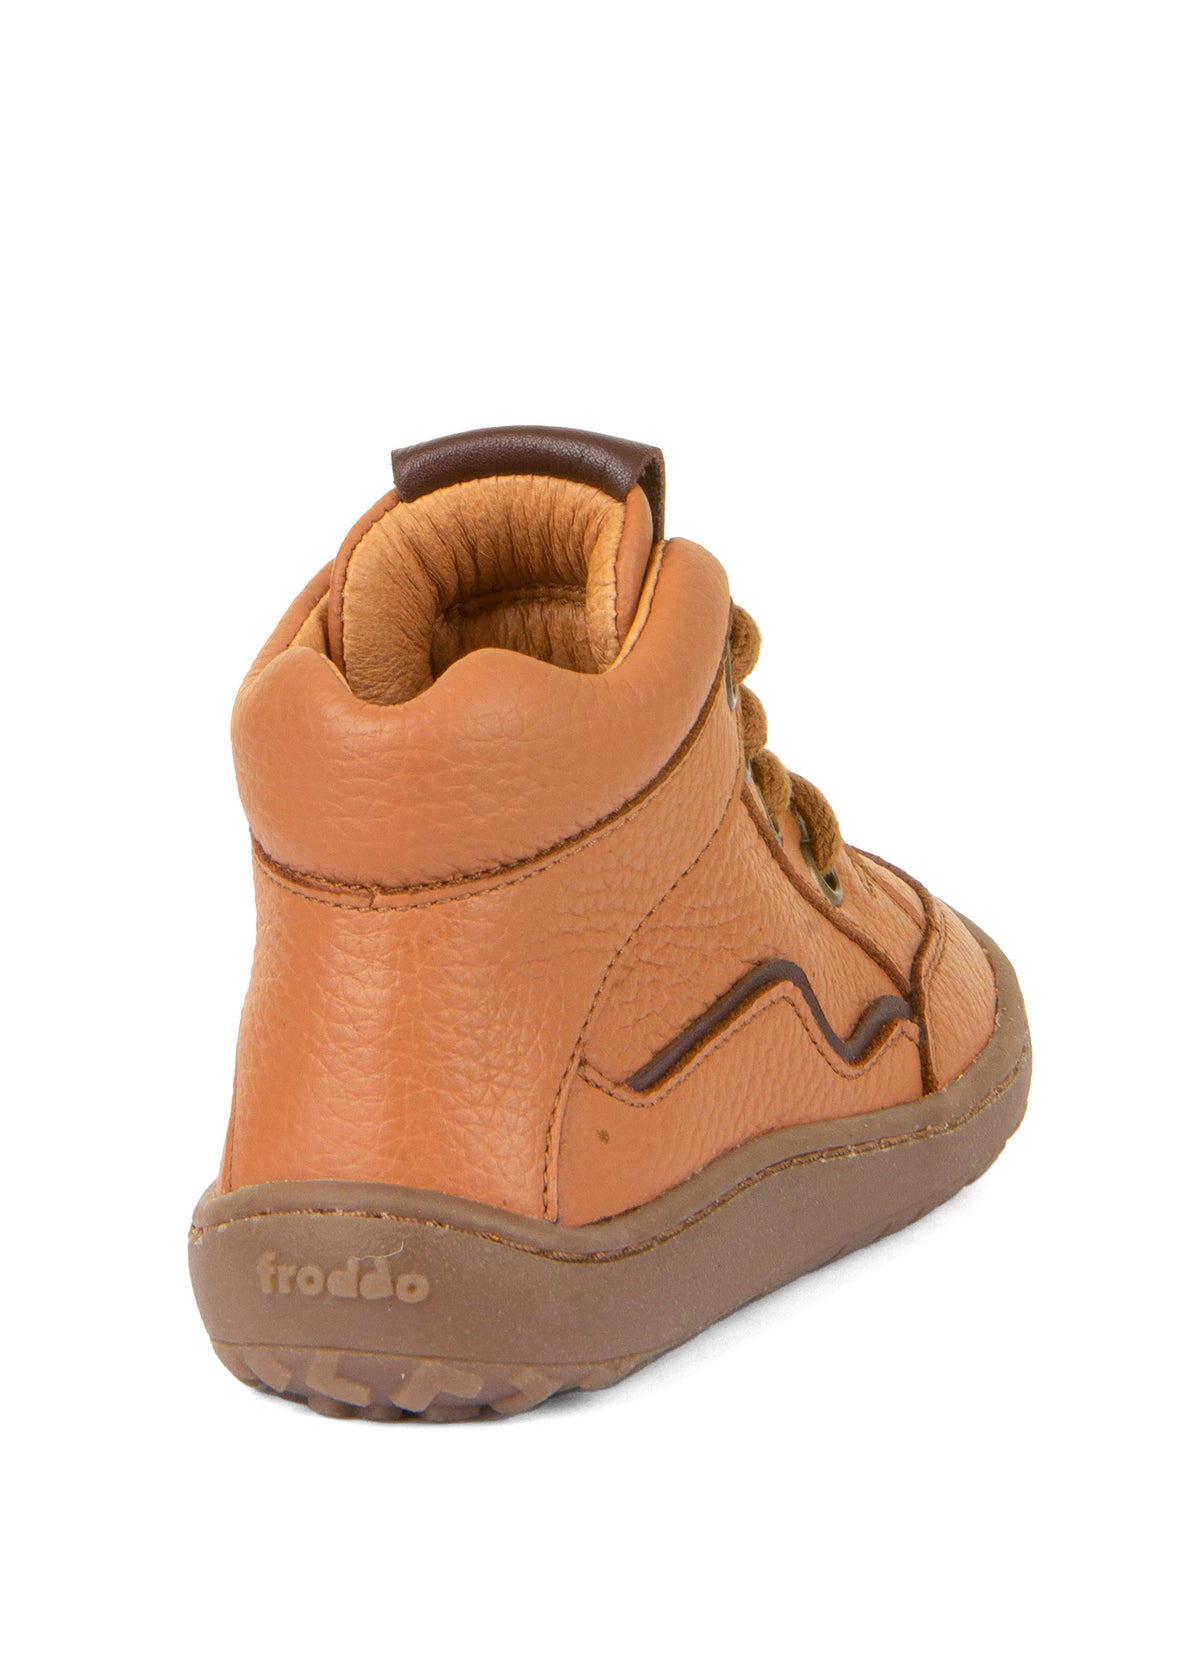 Barefoot sneakers with straps - cognac brown